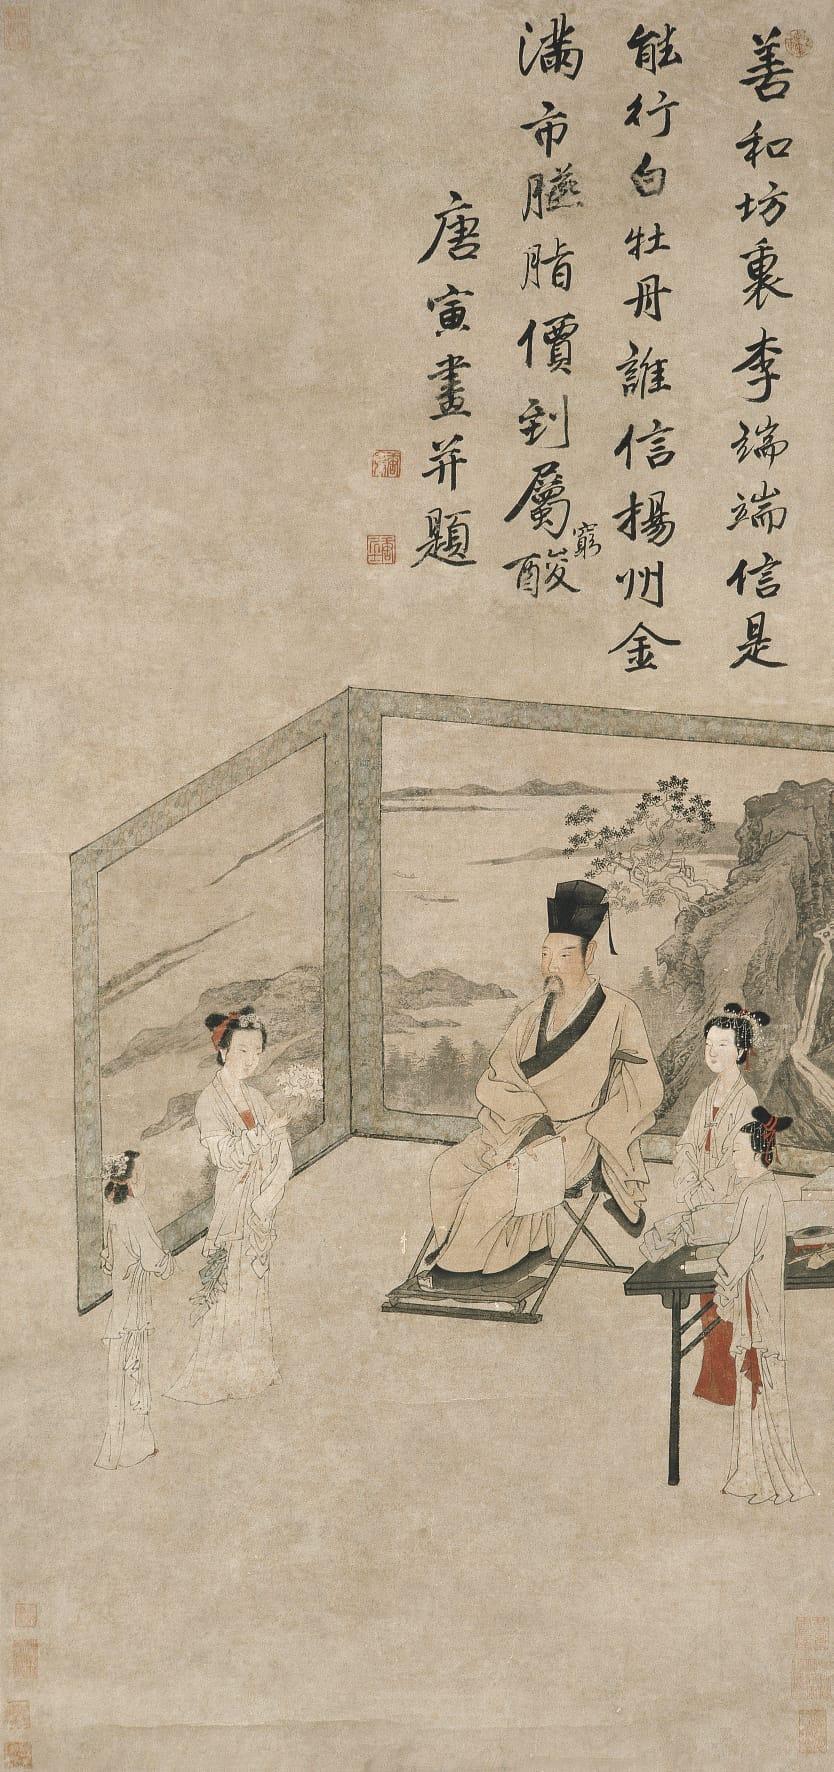 The opening ceremony for the exhibition "The Hong Kong Jockey Club Series: Women and Femininity in Ancient China - Treasures from the Nanjing Museum" was held today (November 29) at the Hong Kong Heritage Museum. Photo shows a grade-one national treasure, the painting "Li Duanduan" by Tang Yin, one of the four painting masters of the Ming dynasty. (Source of photo: Nanjing Museum)